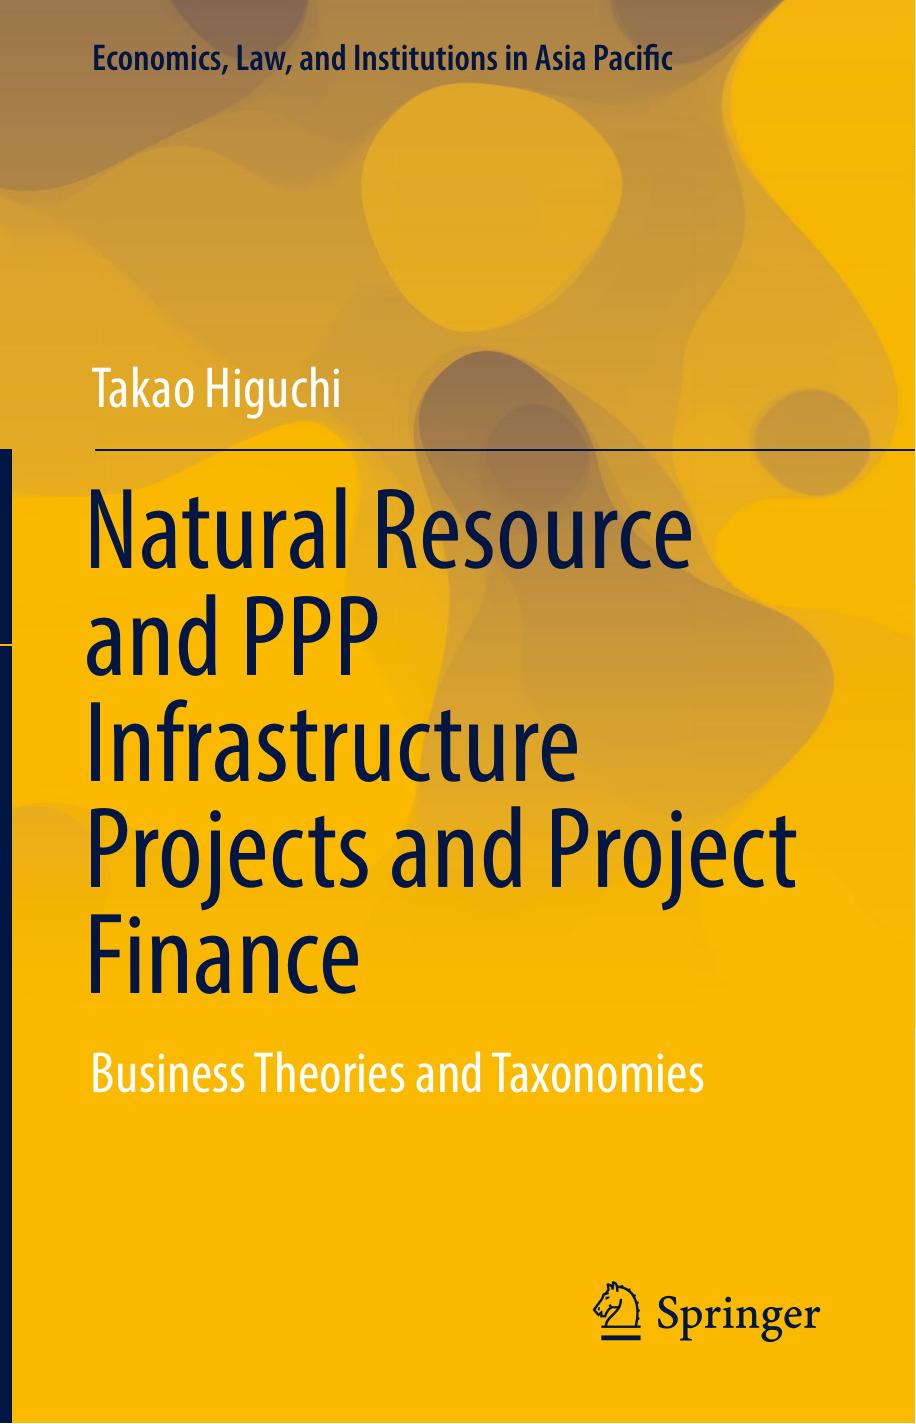 Natural Resource and PPP Infrastructure Projects and Project Finance 2019.pdf